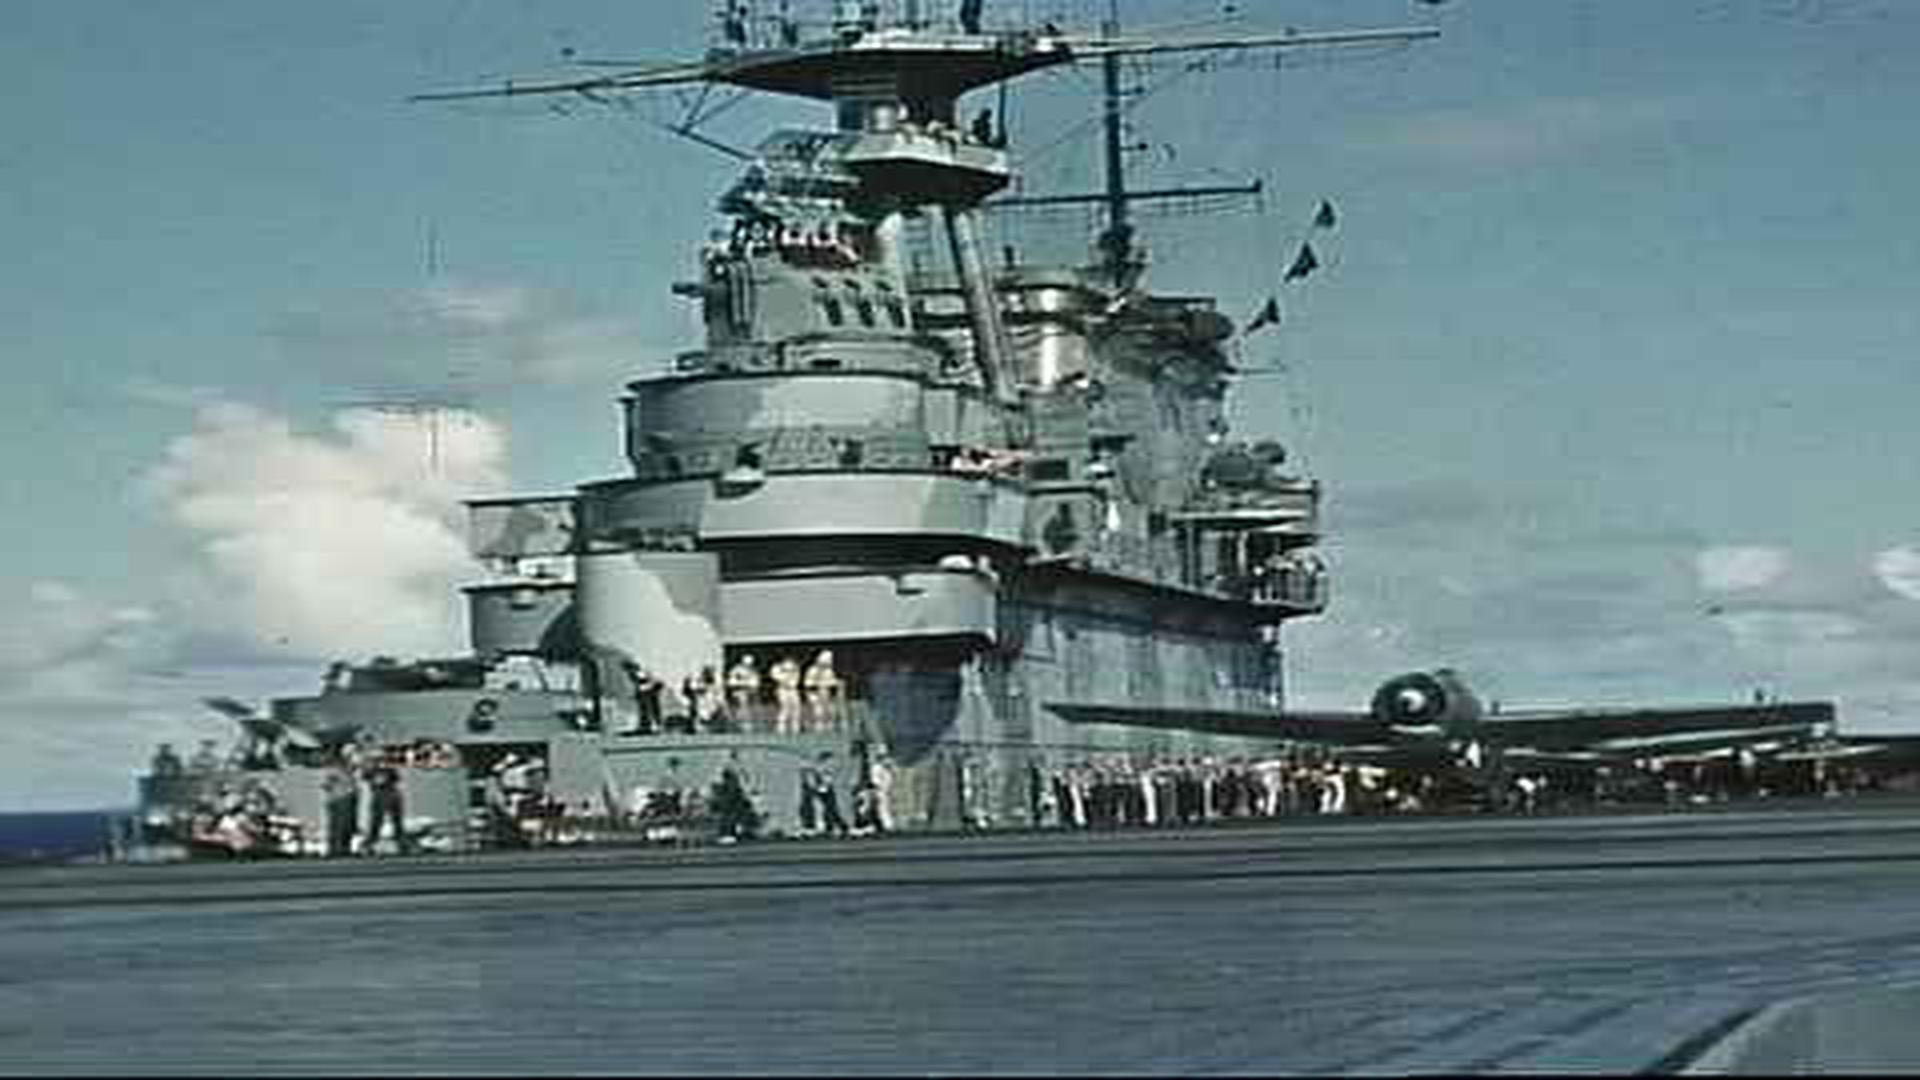 Montage Of Image Wwii Battle Midway Documentary Film Hi